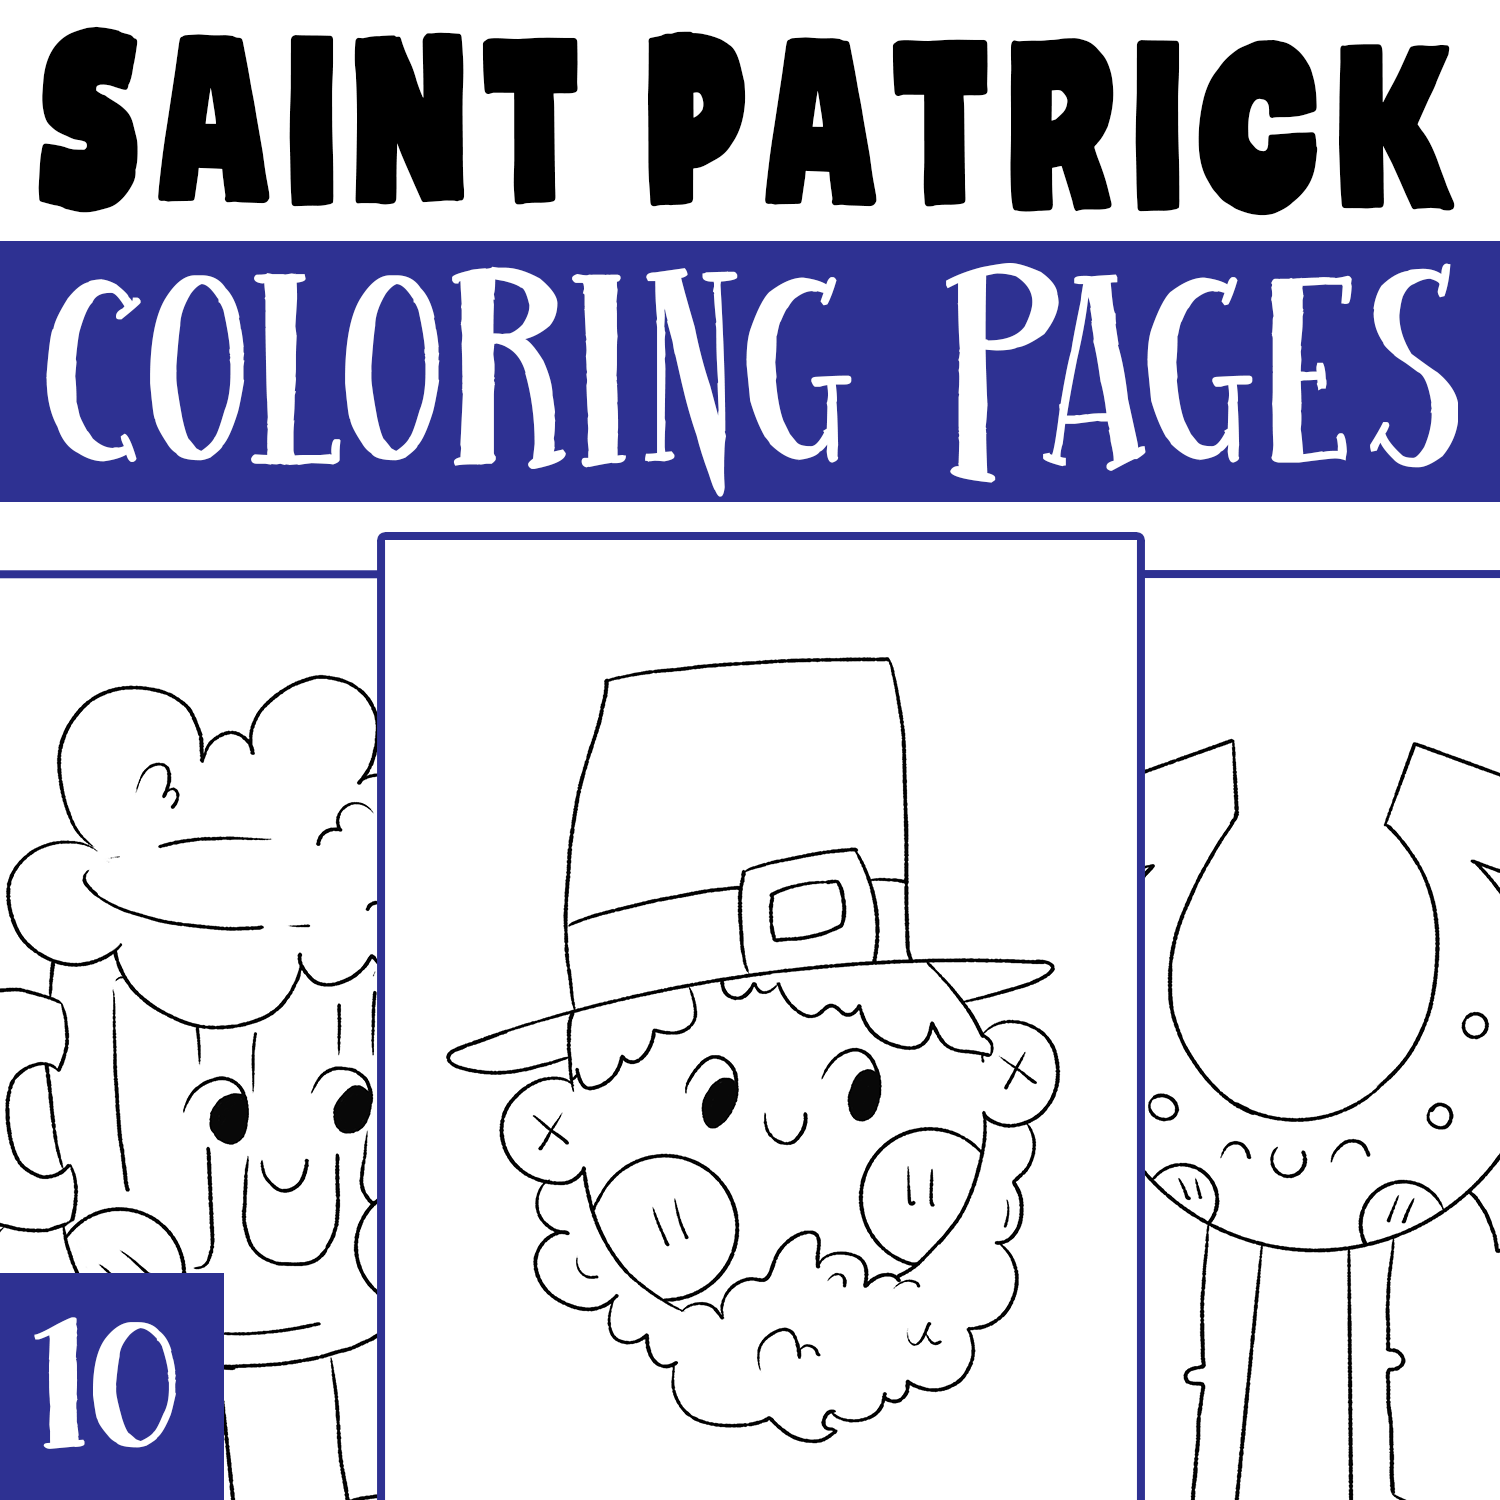 St patrick day coloring pages paddys day coloring sheet activity morning work made by teachers